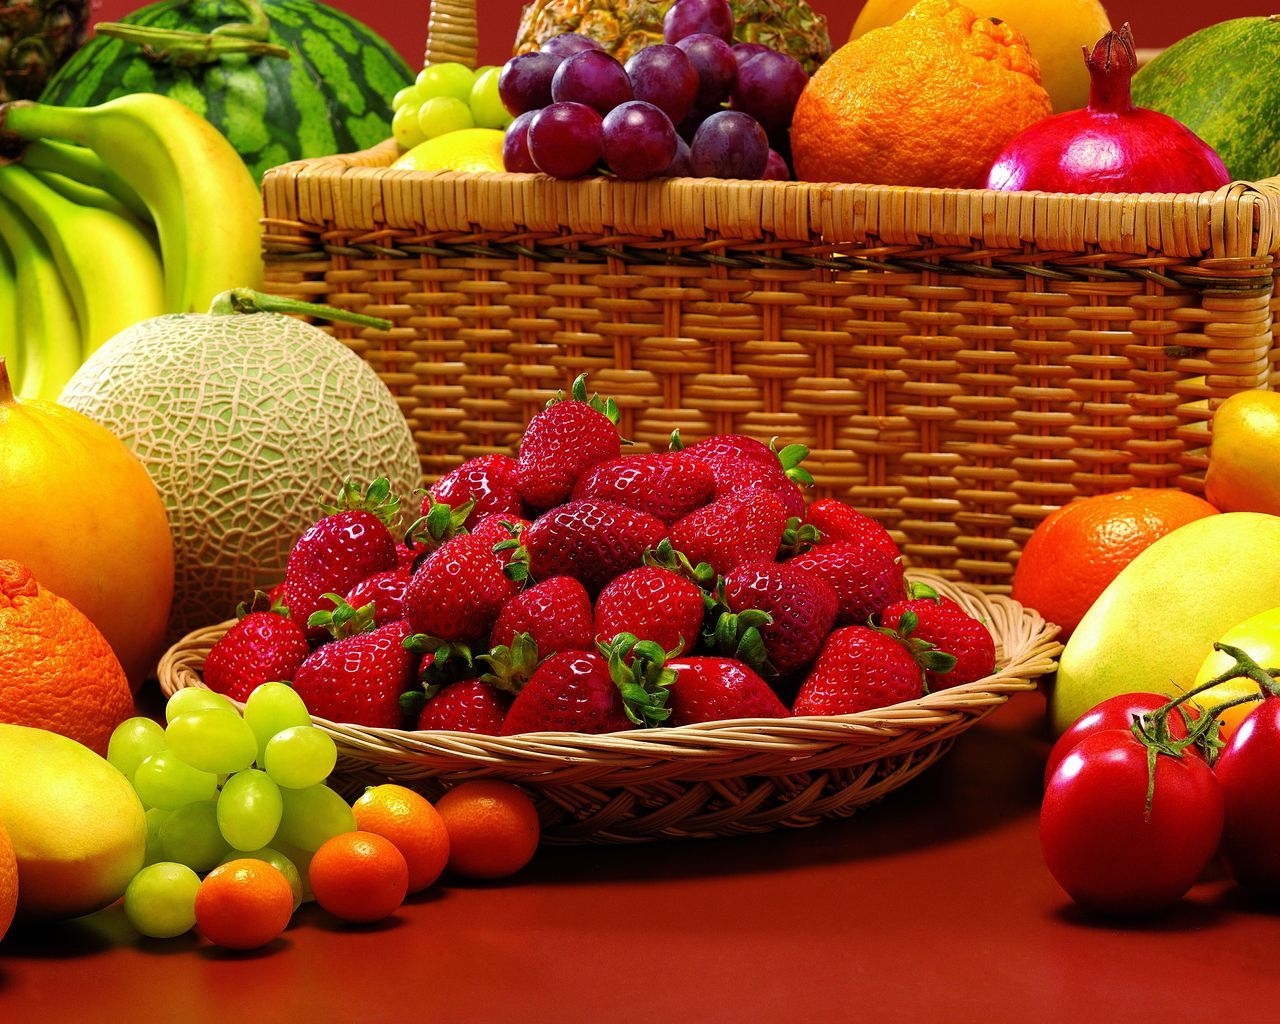 Amazing Fruits for 1280 x 1024 resolution